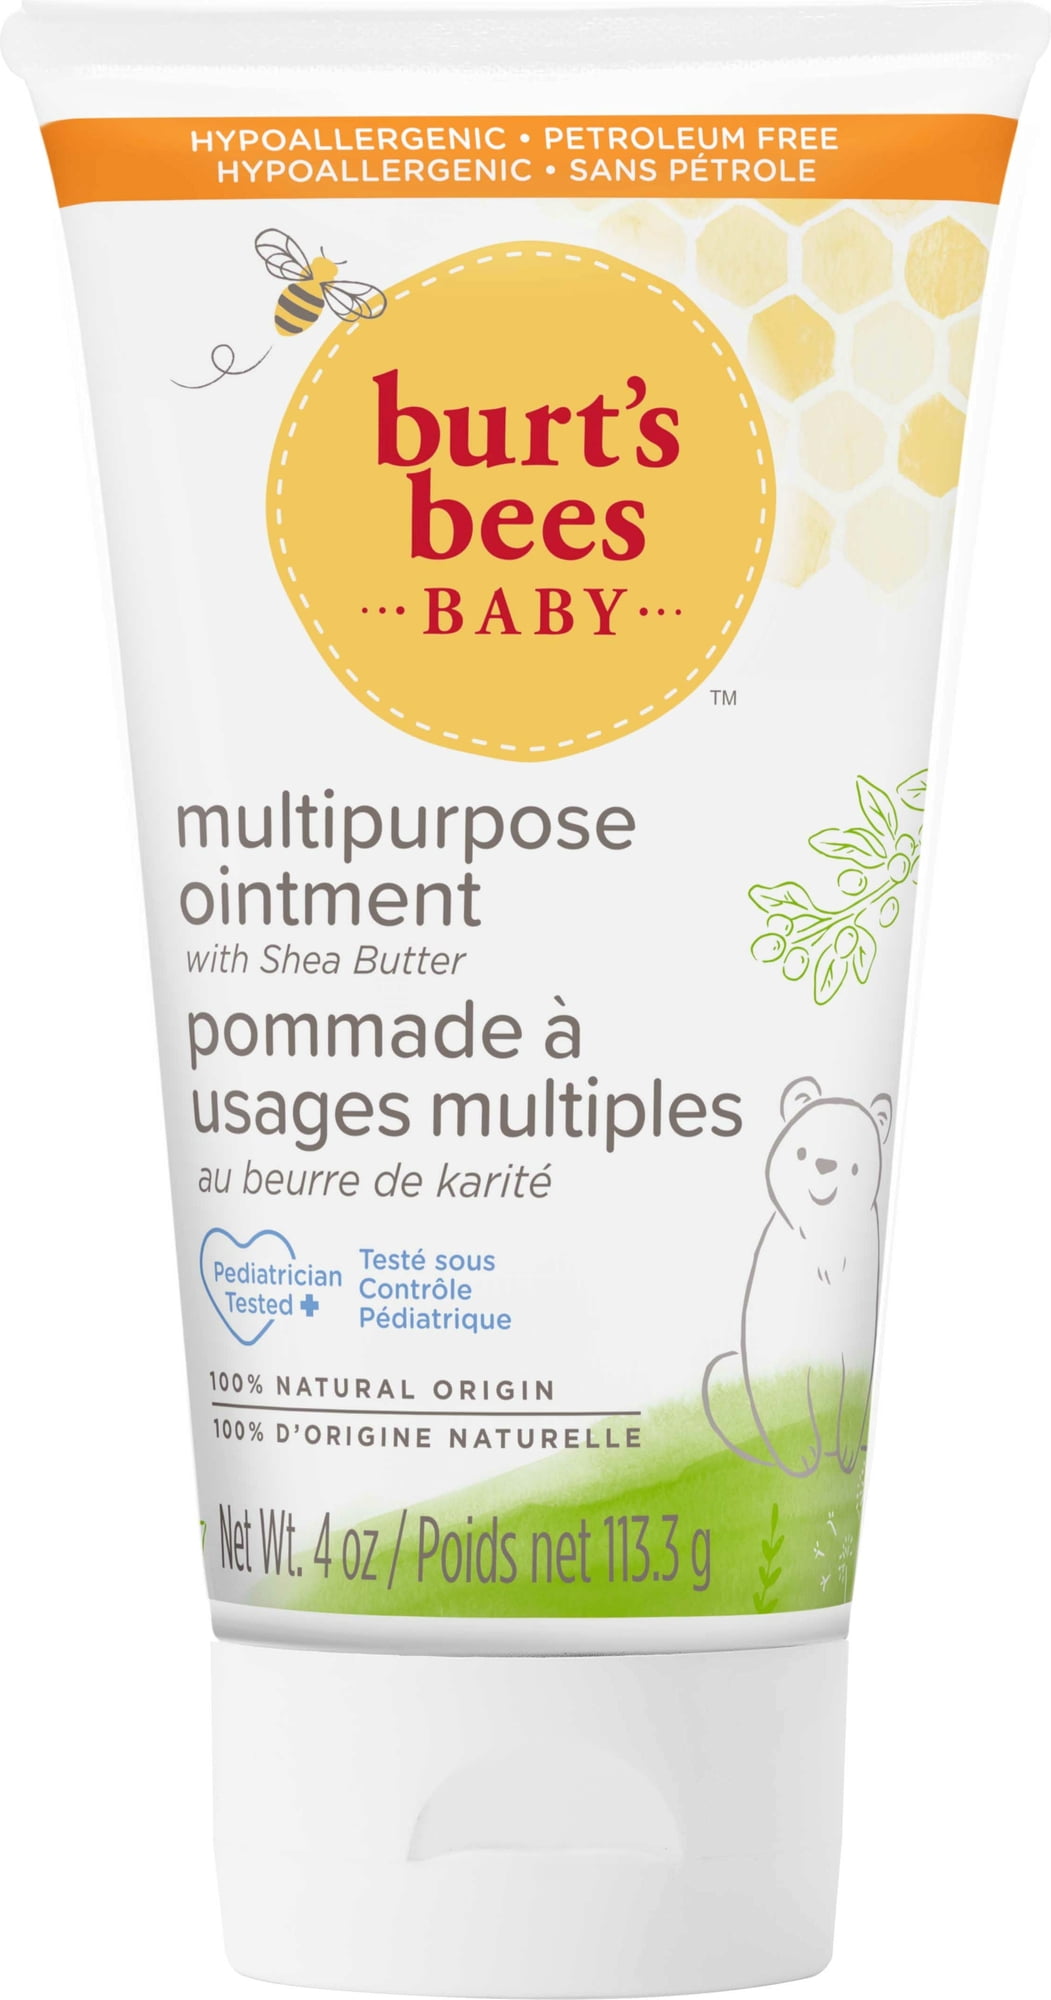 411256e3-burts-bees-baby-bee-multipurpose-ointment-11330-g-1667384-de